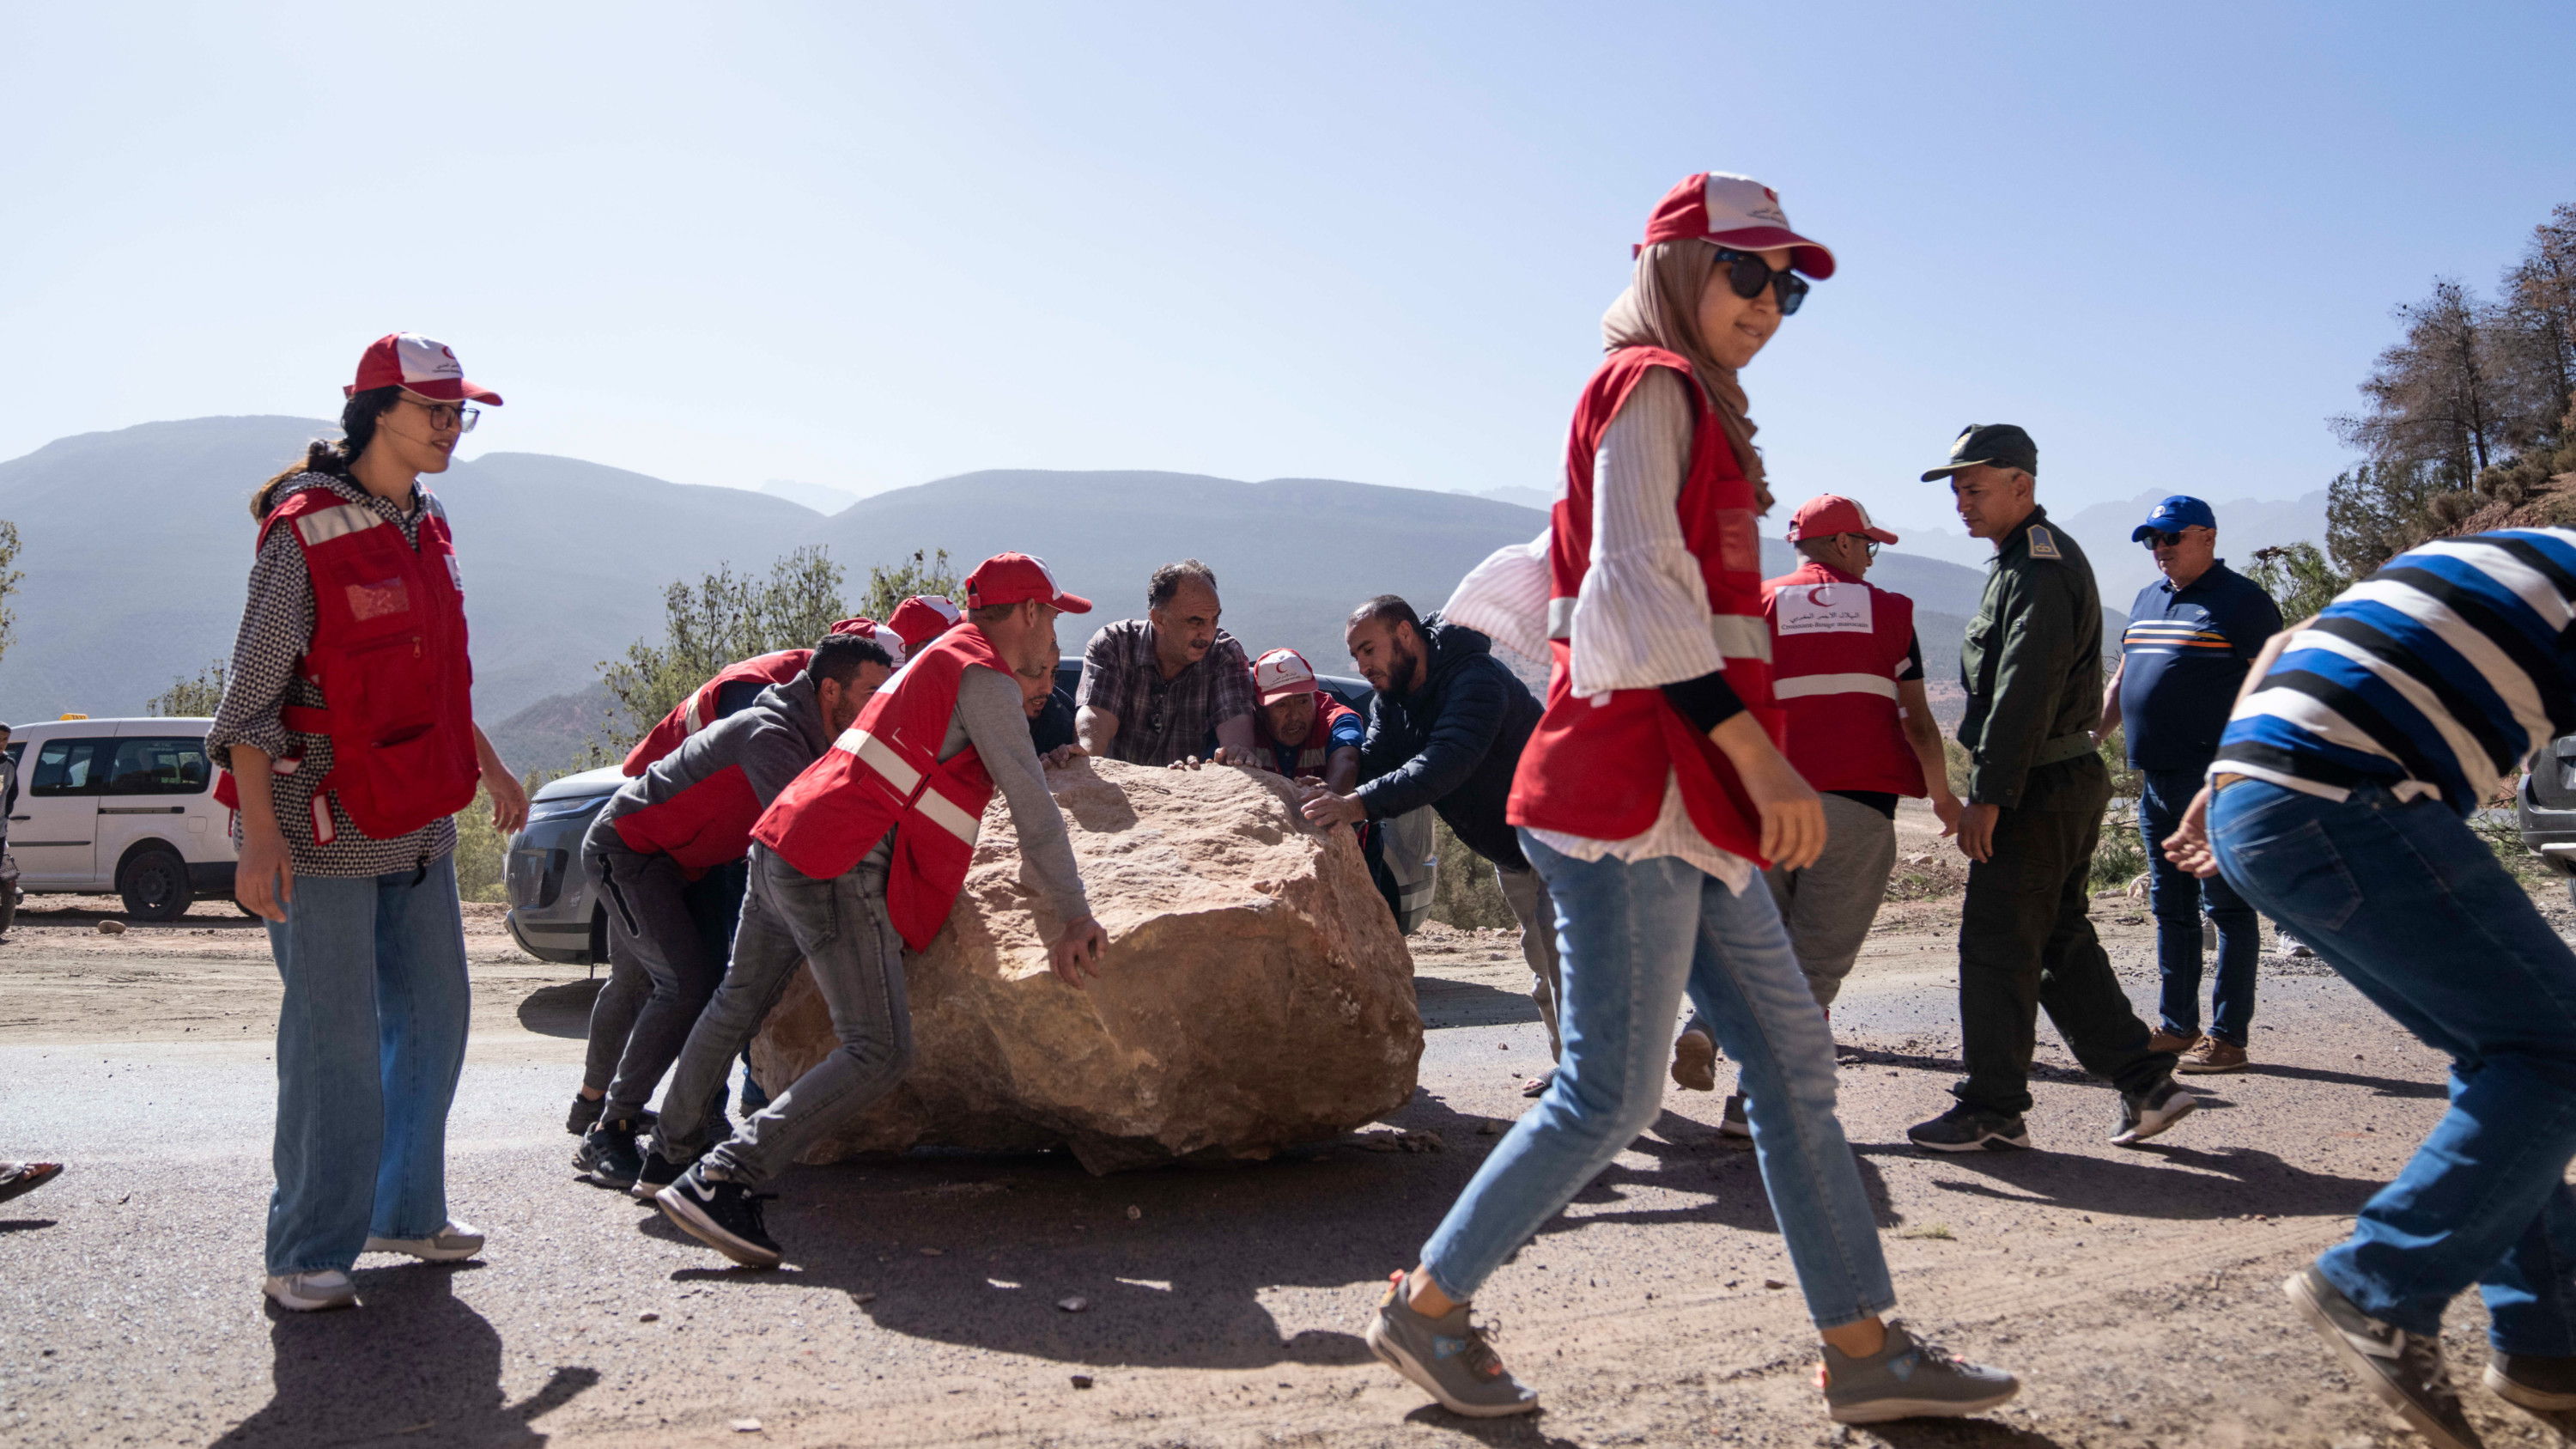 Moroccan Red Crescent workers attempt to remove large stones which fell on roads during an earthquake, on the way to affected villages in the Middle Atlas mountain near Marrakech (AP)